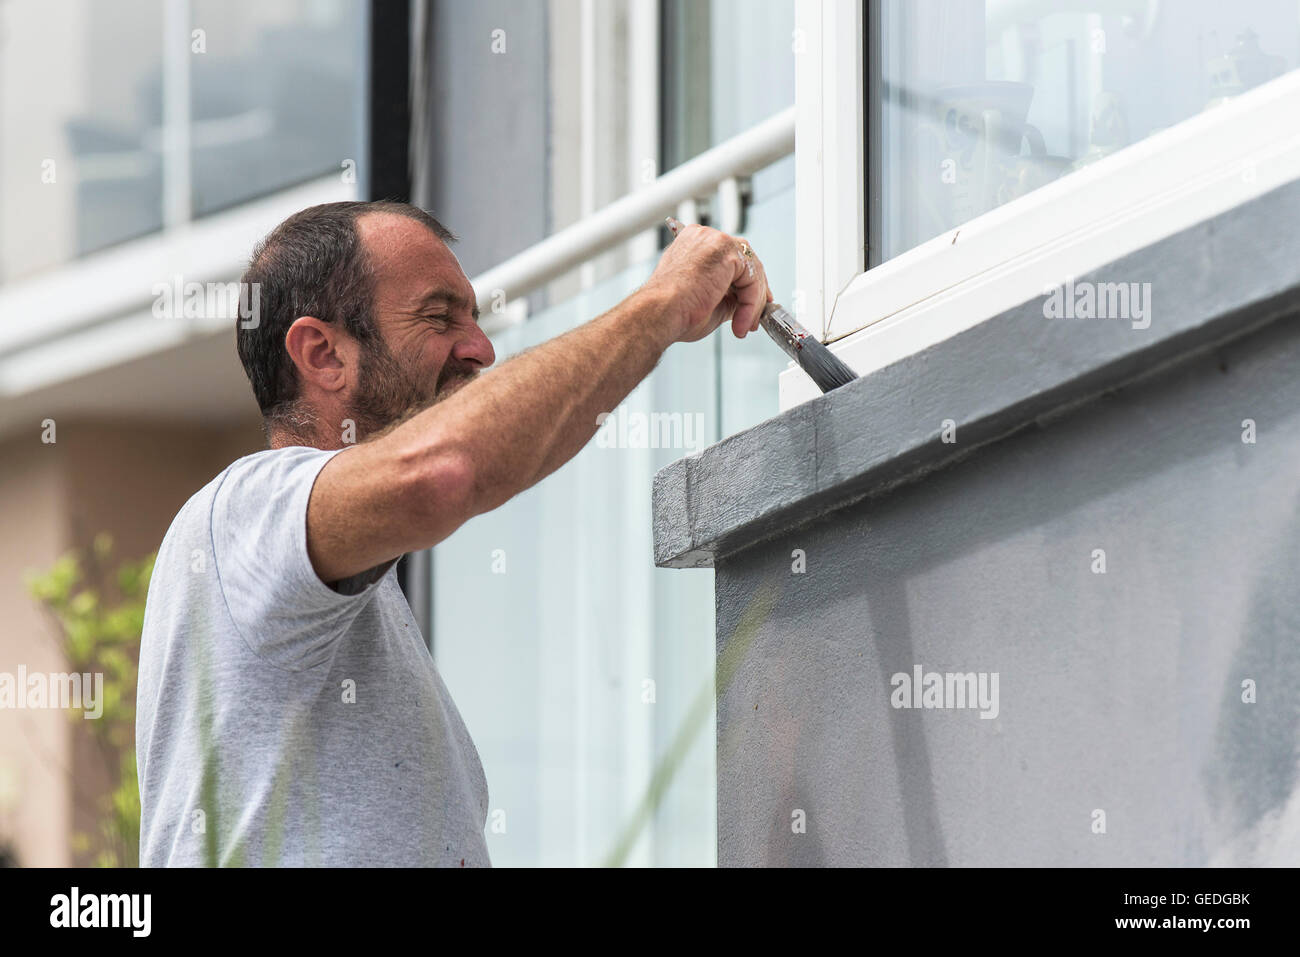 A painter and decorator paints the exterior wall of a house. Stock Photo